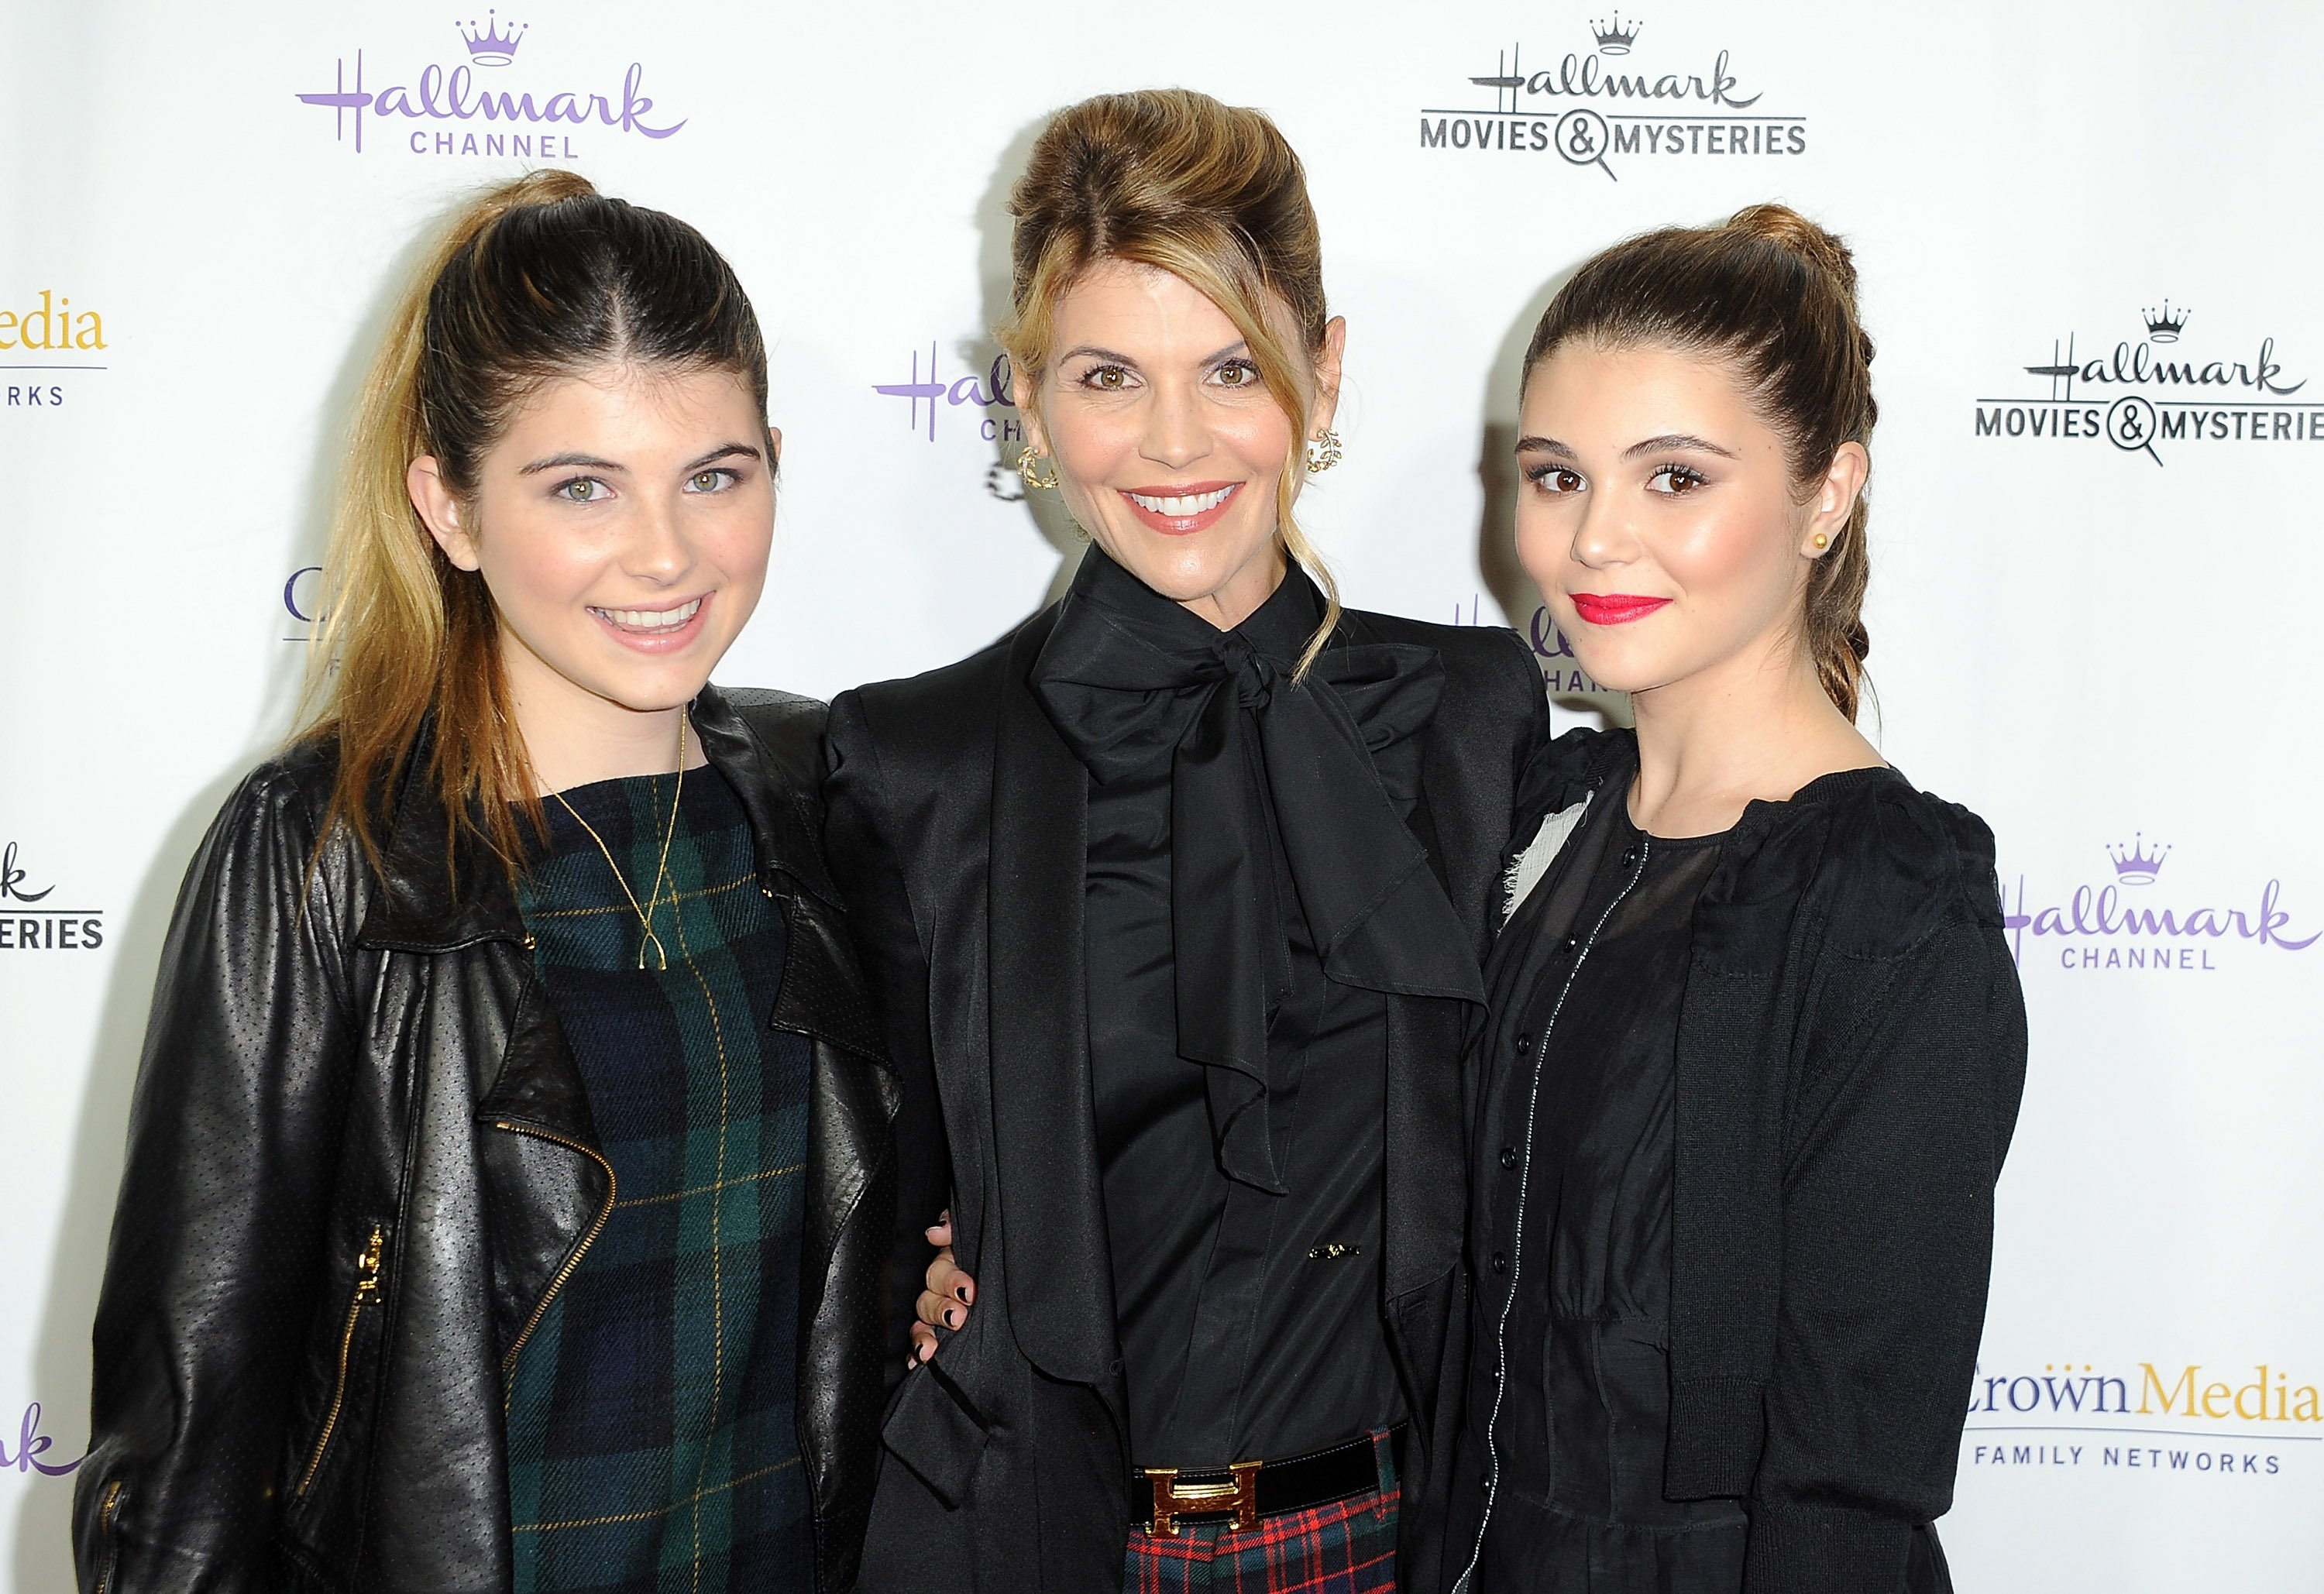 Lori Loughlin and her daughters Isabella and Olivia arrive at Hallmark Channel's annual holiday event premiere screening of "Northpole" on November 4, 2014. | Source: Getty Images